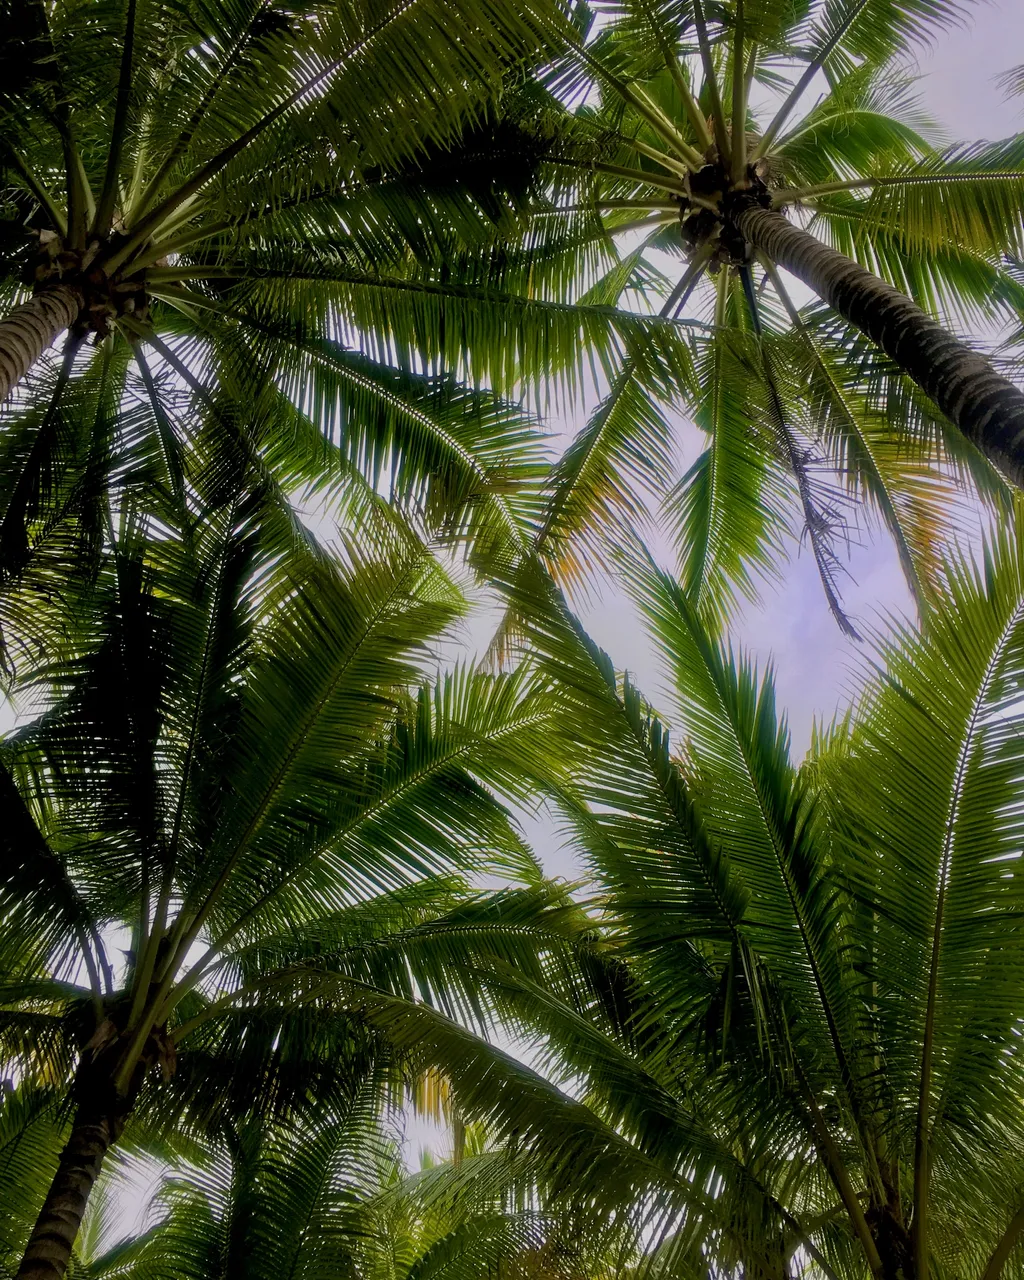 A canopy of palm trees